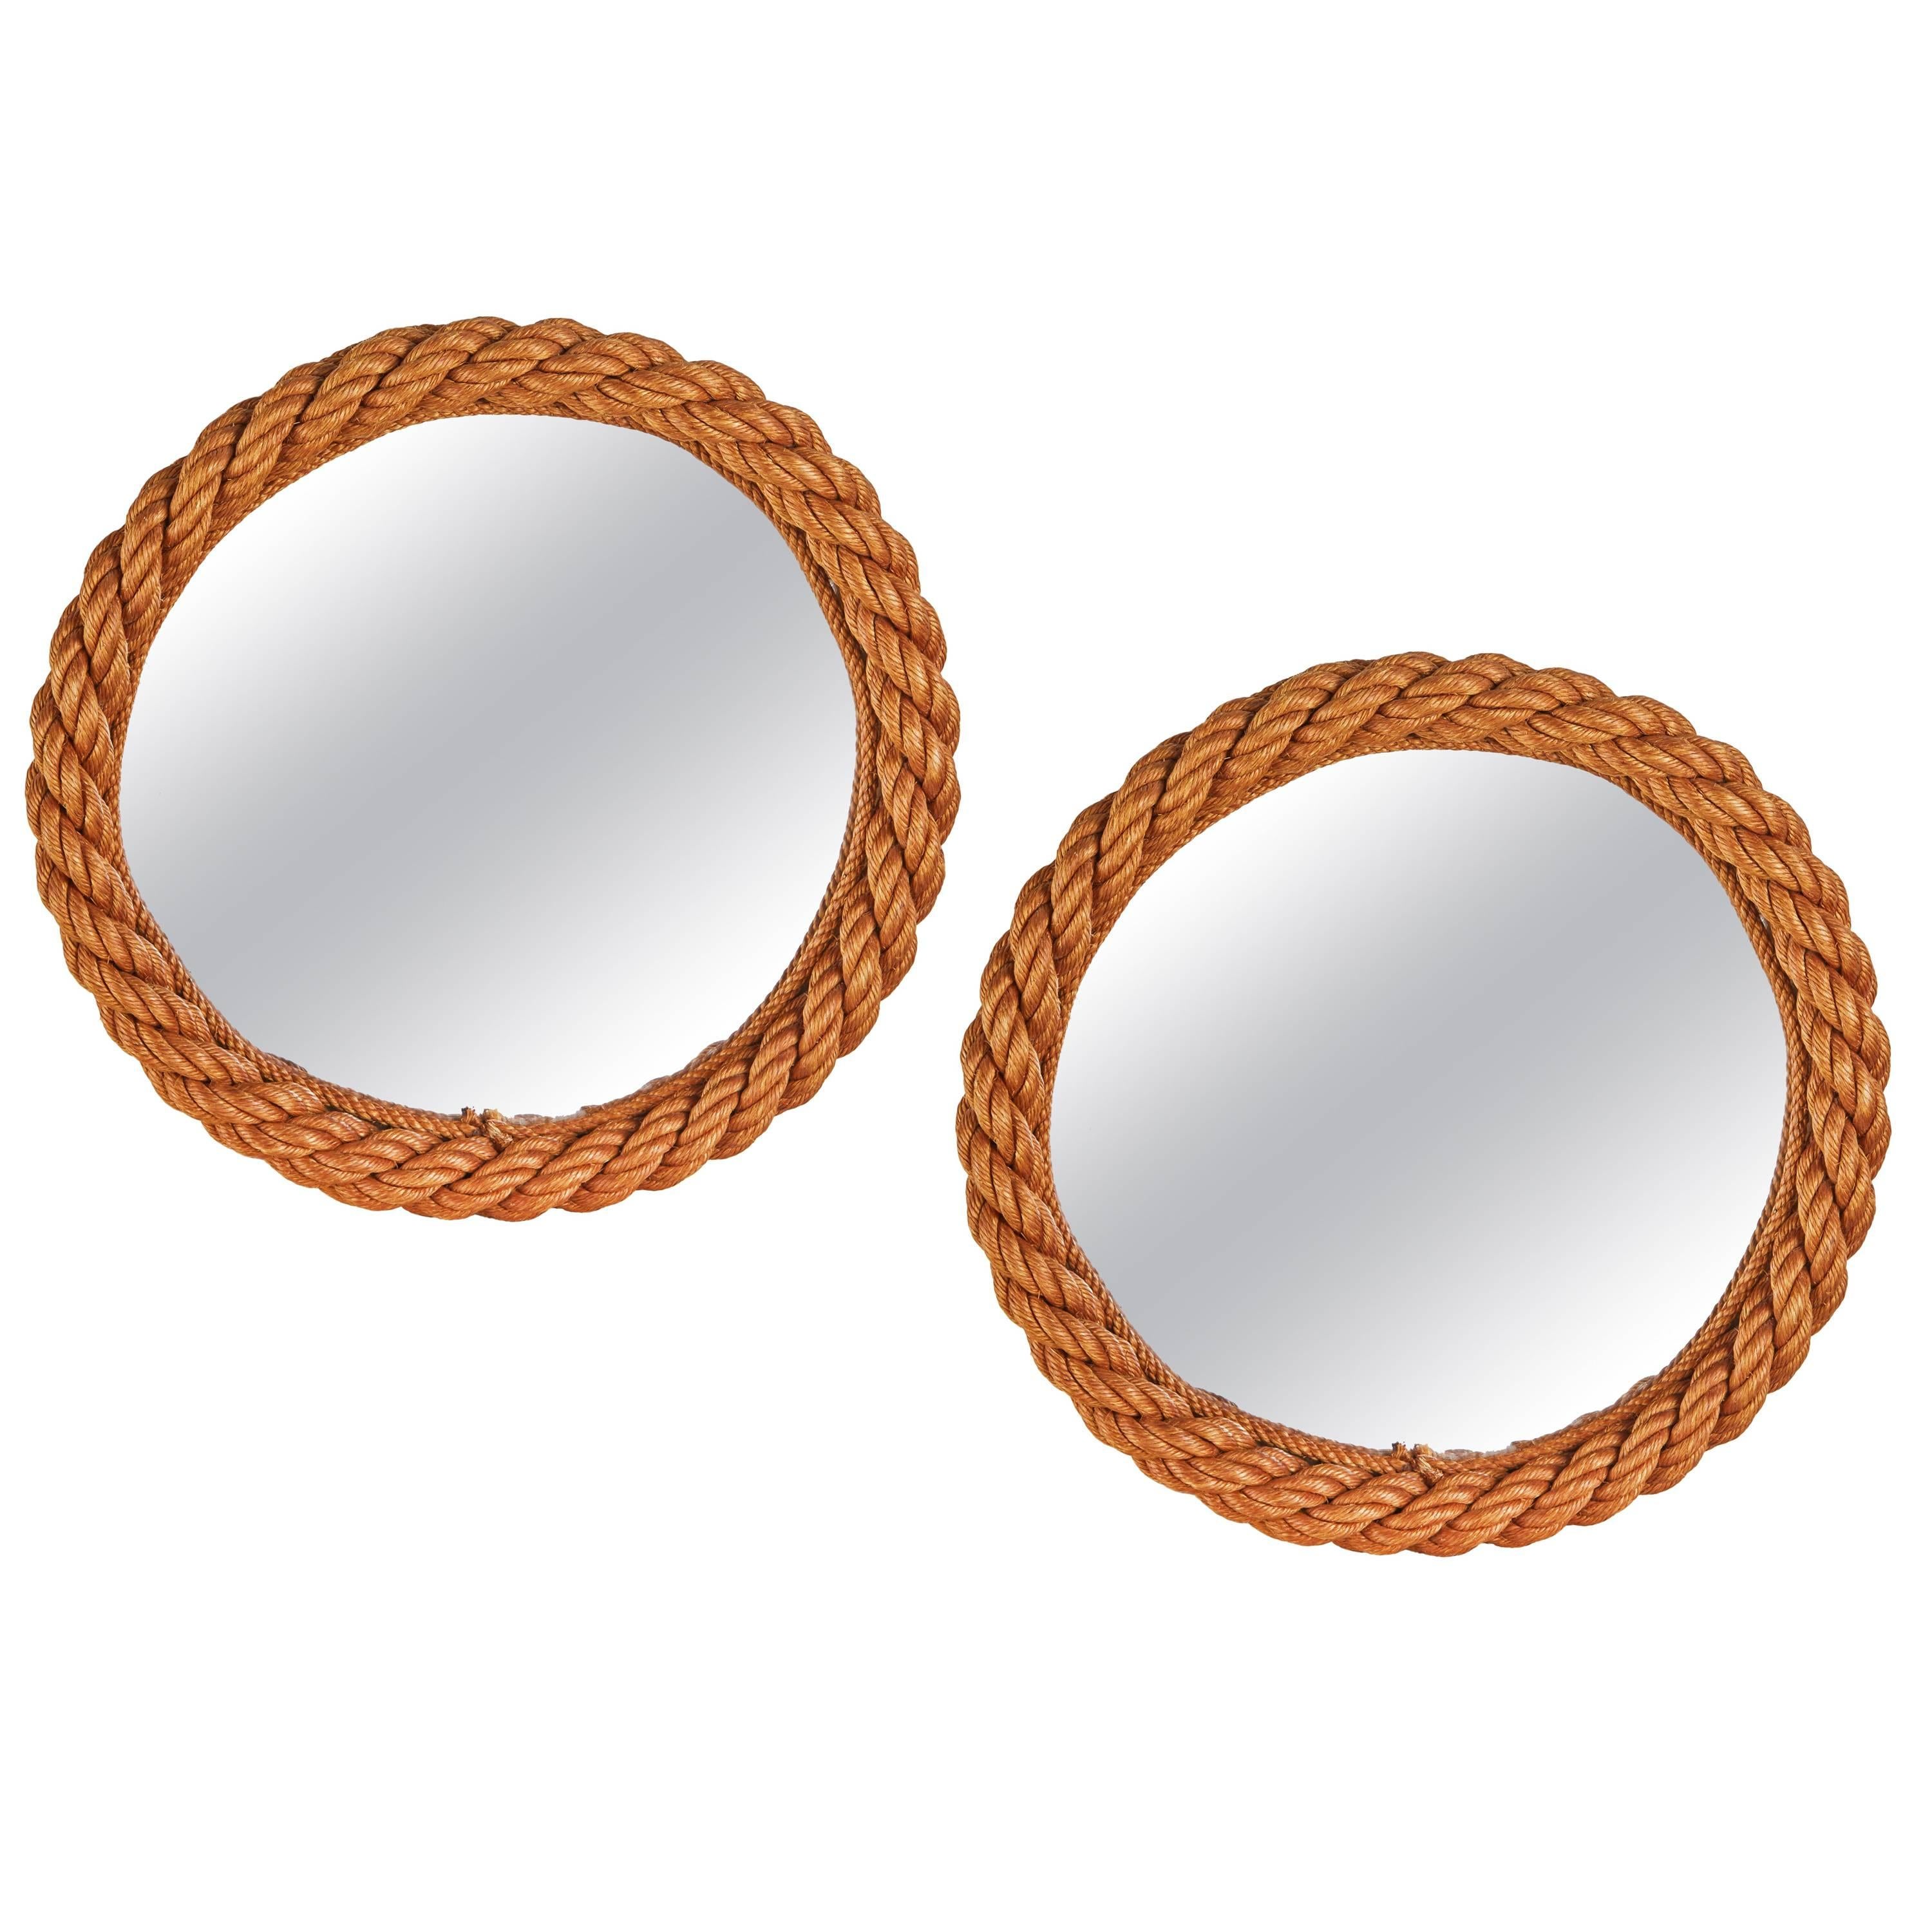 Circular Rope Mirror by Adrien Audoux and Frida Minet